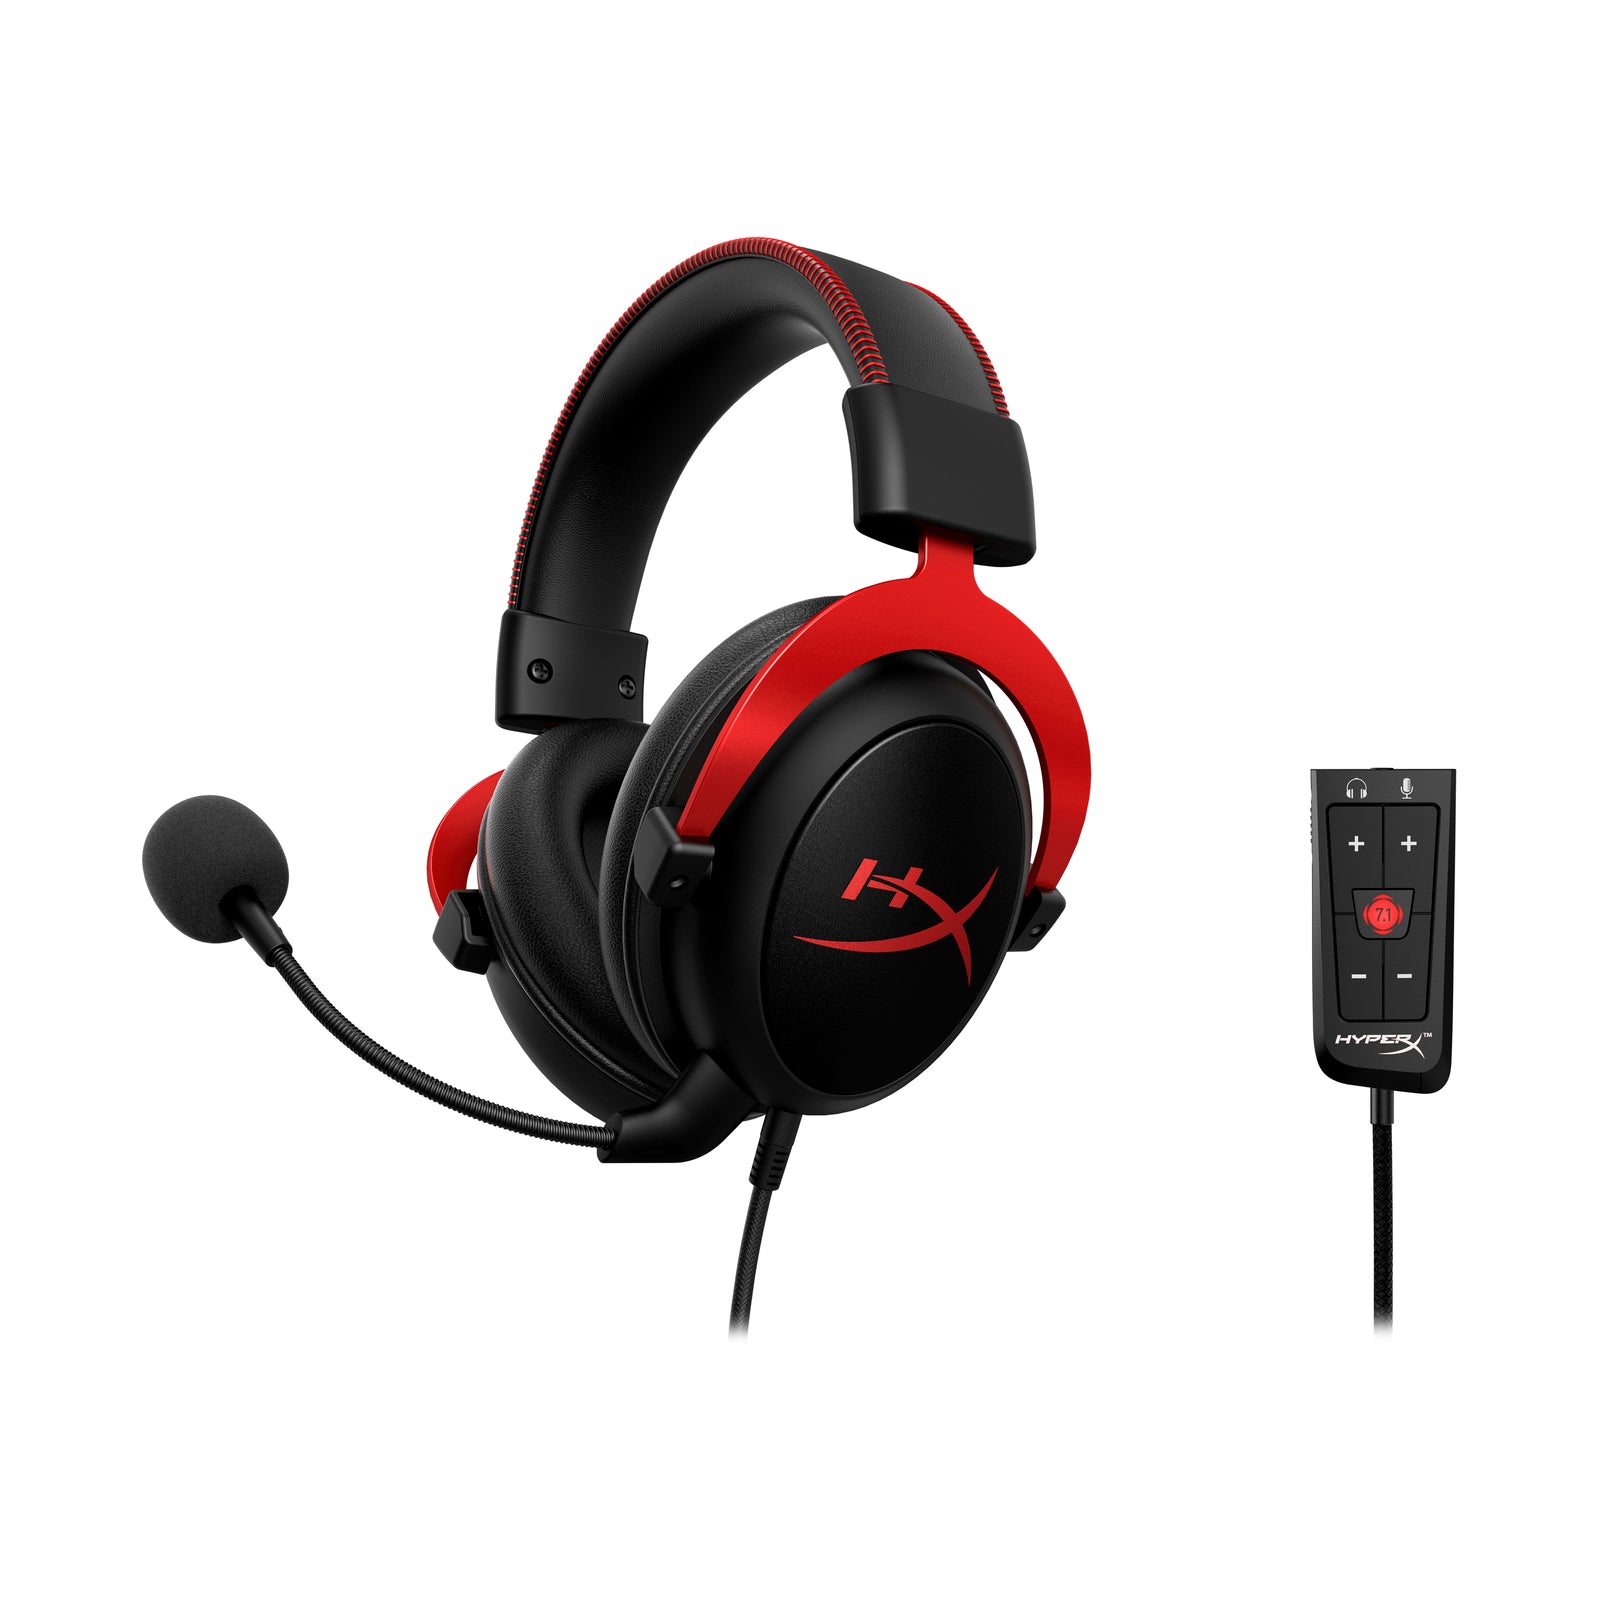 HyperX Cloud vs HyperX Cloud II: What is the difference?